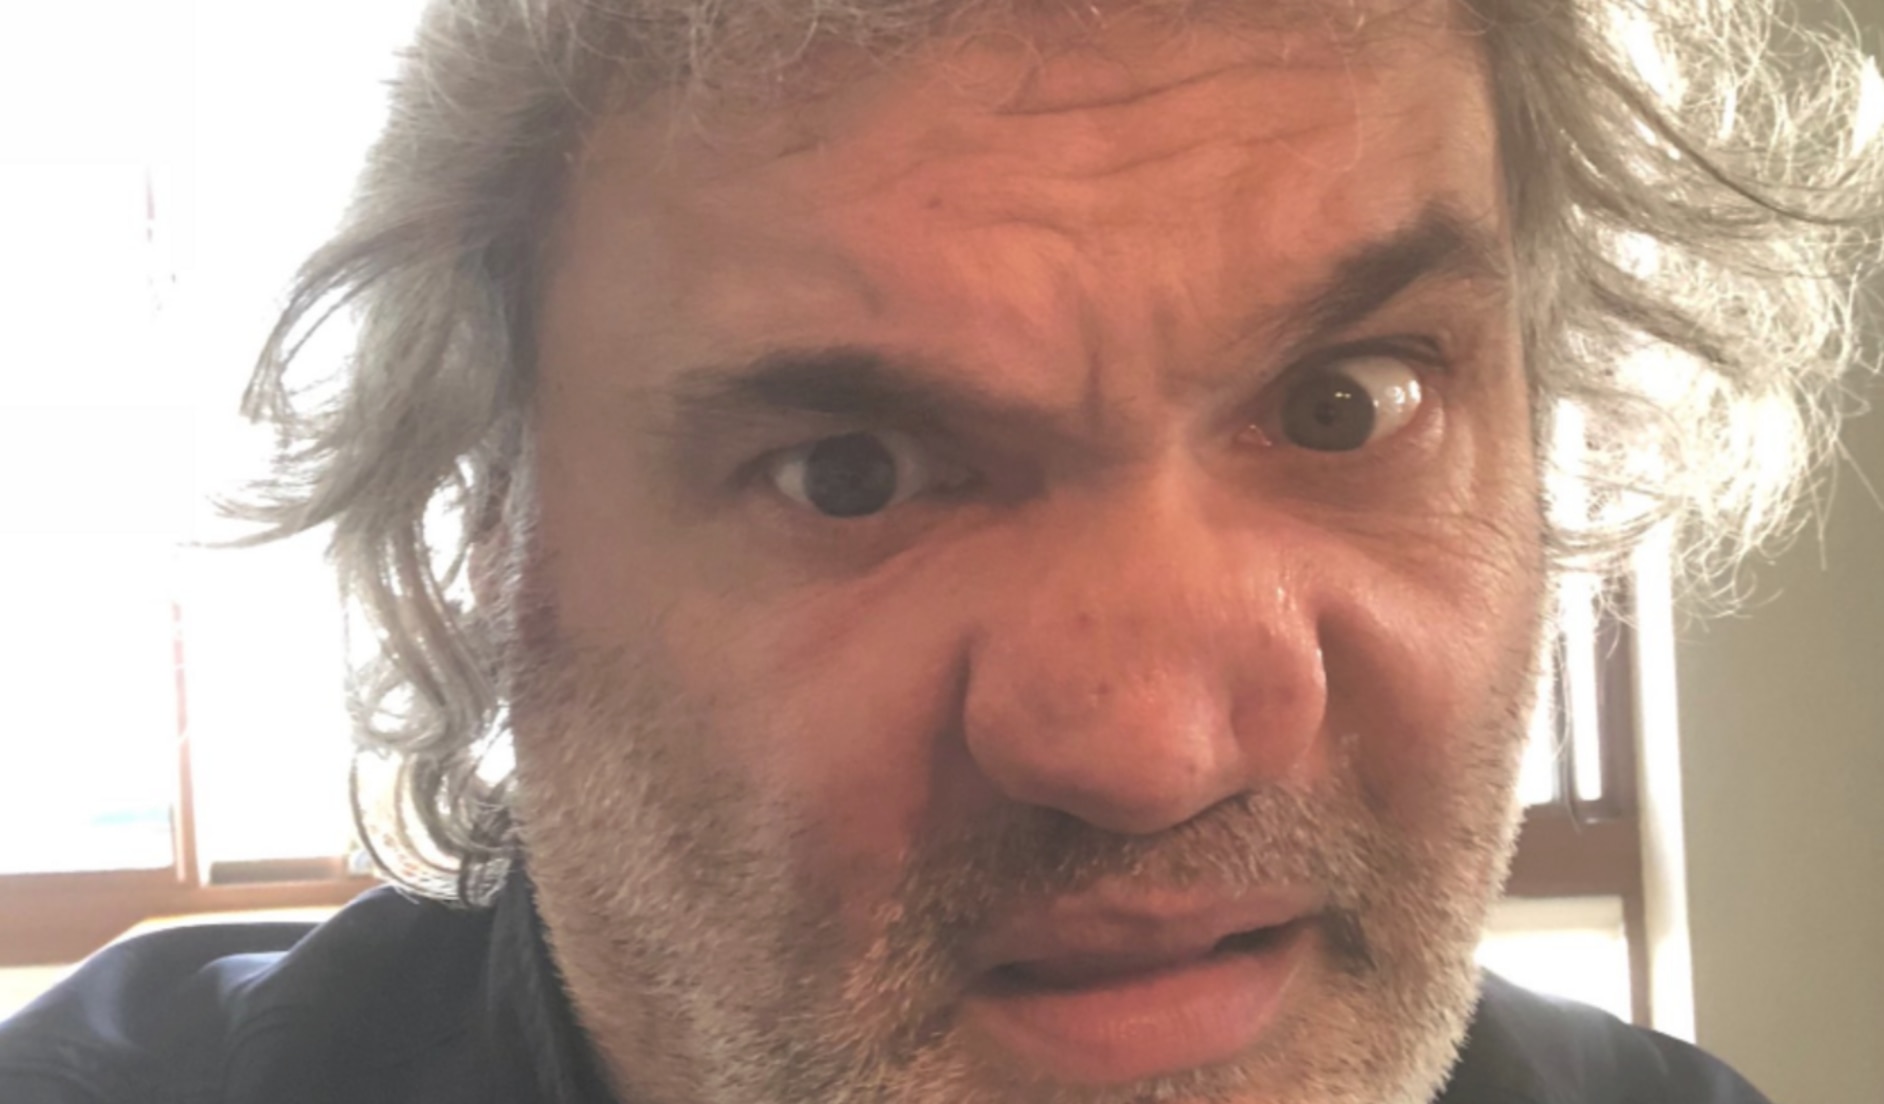 Comedian Artie Lange Posts Photo Of 'Hideously Deformed' Nose, Th...